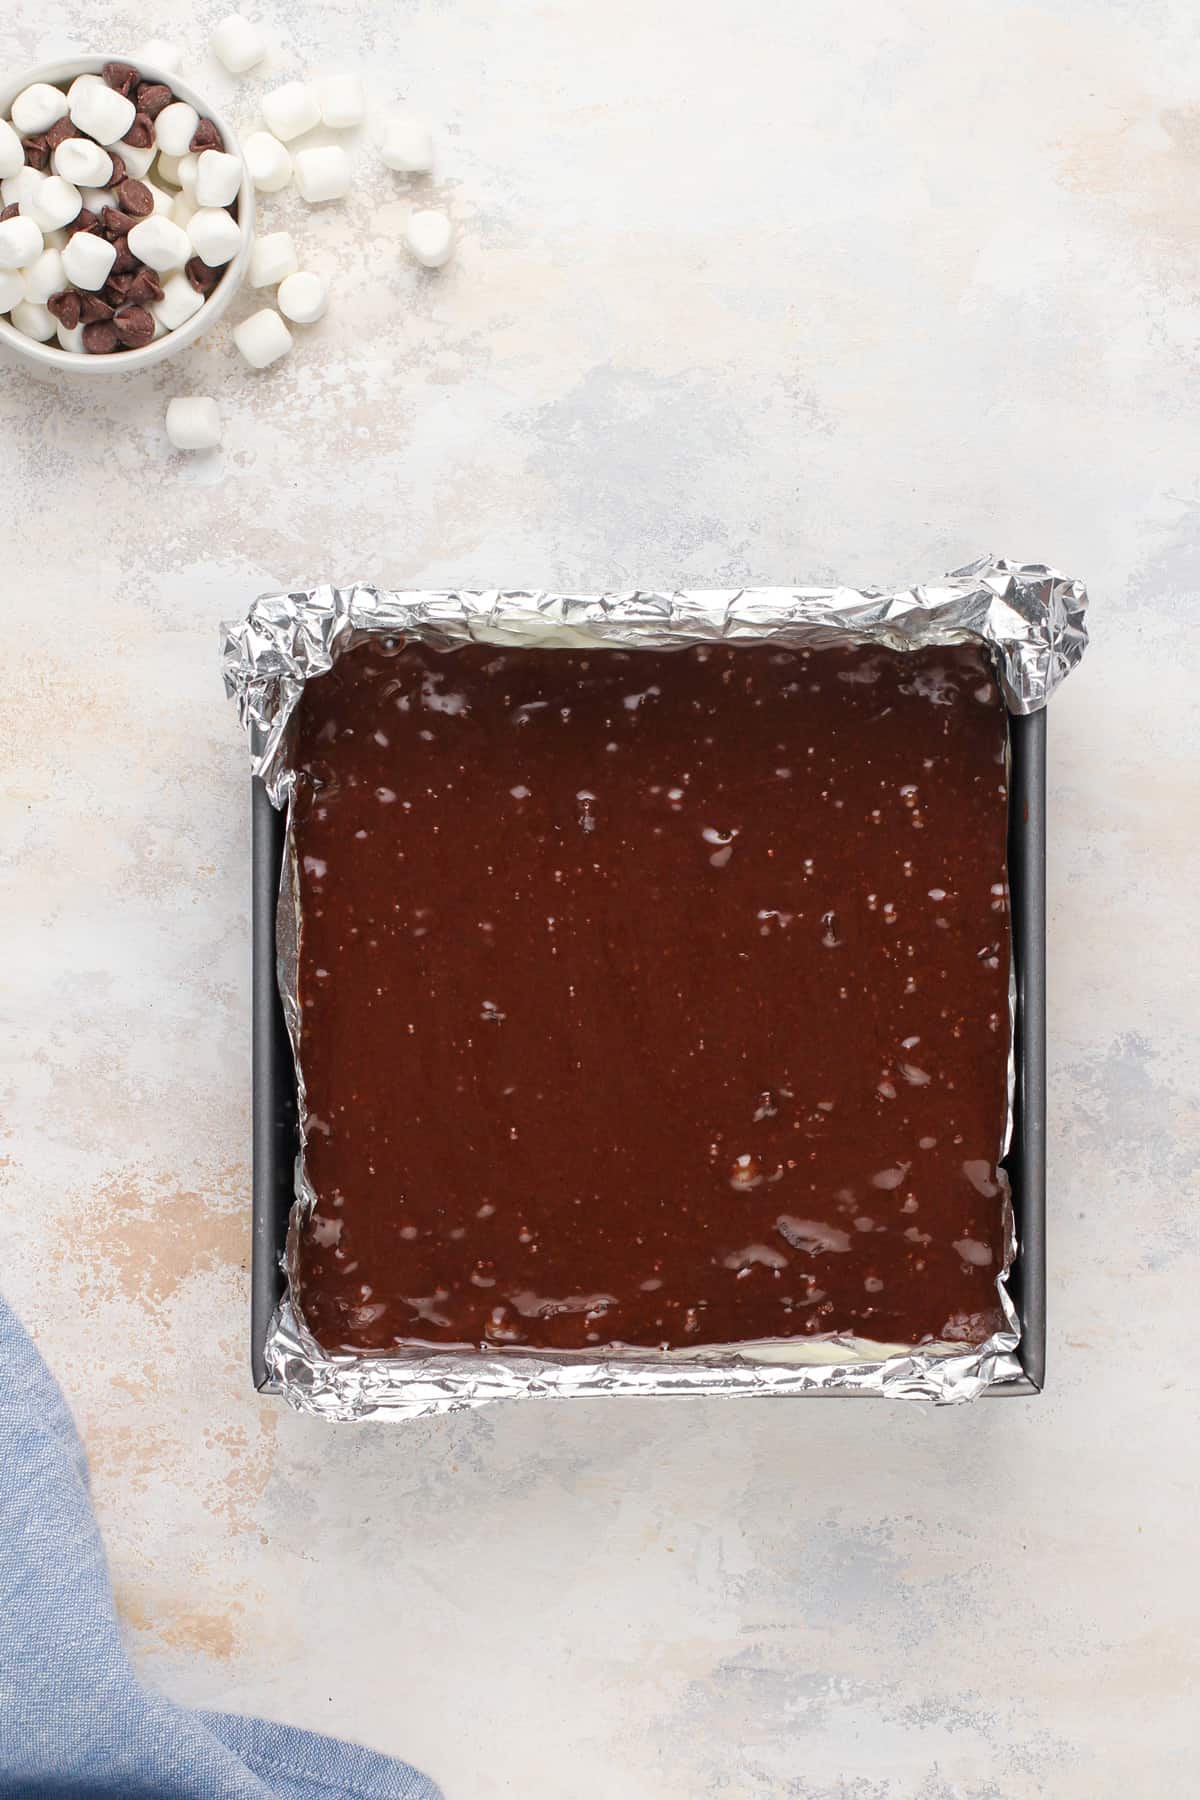 Brownie batter poured over graham crackers in a baking pan, ready to go in the oven.